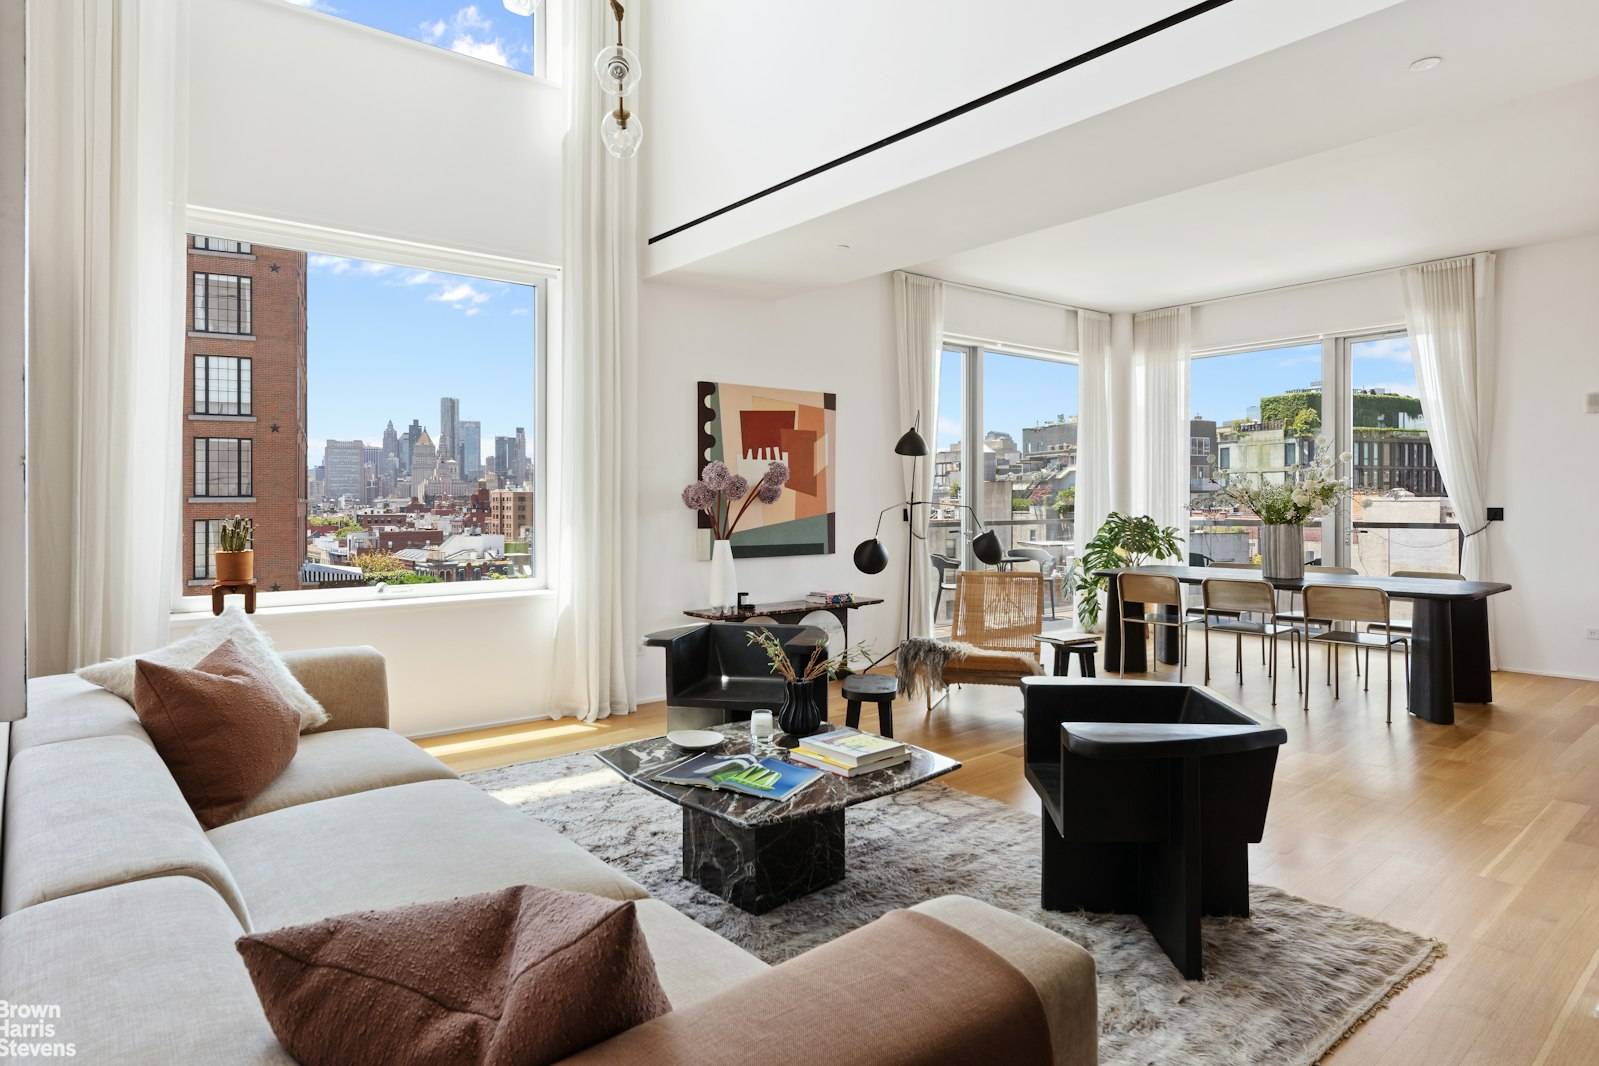 This exquisite 2, 900SF duplex residence is located at the vibrant crossroads of Noho and the East Village and features clean modern lines, crisp contemporary finishes and sweeping views of ...